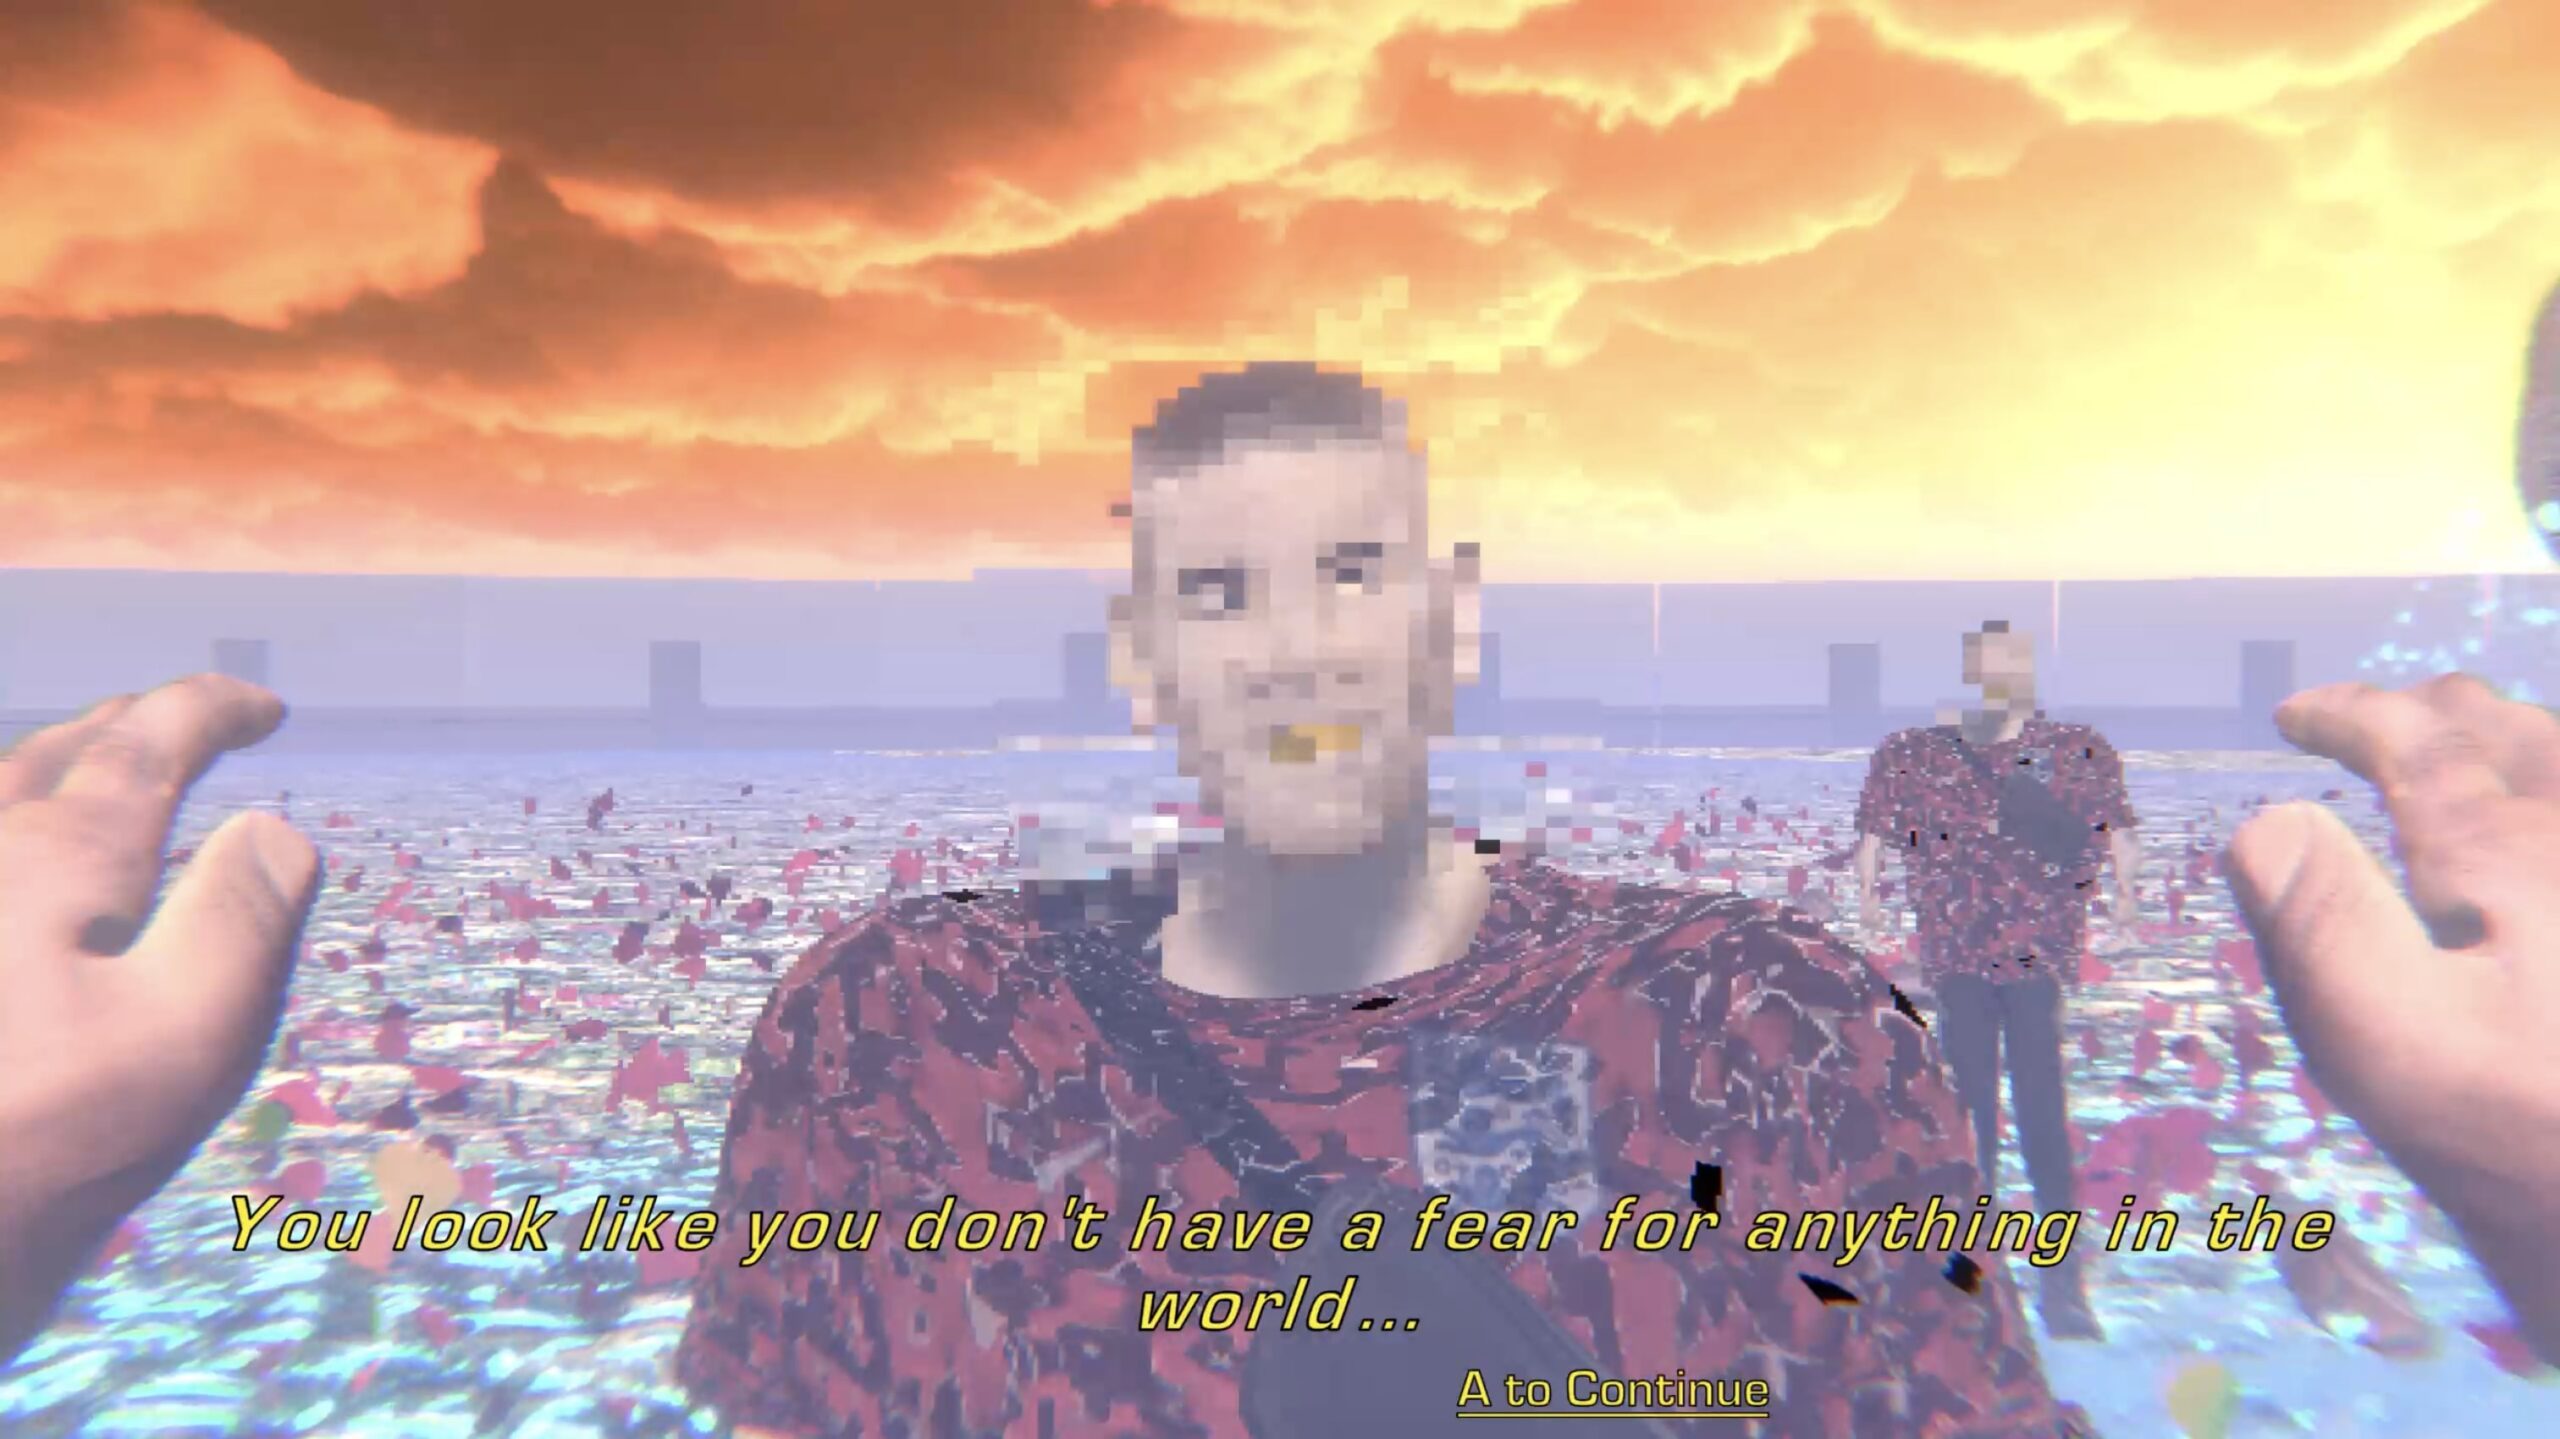 An animation showing a surreal landscape with a doubled image of a man looking straight ahead